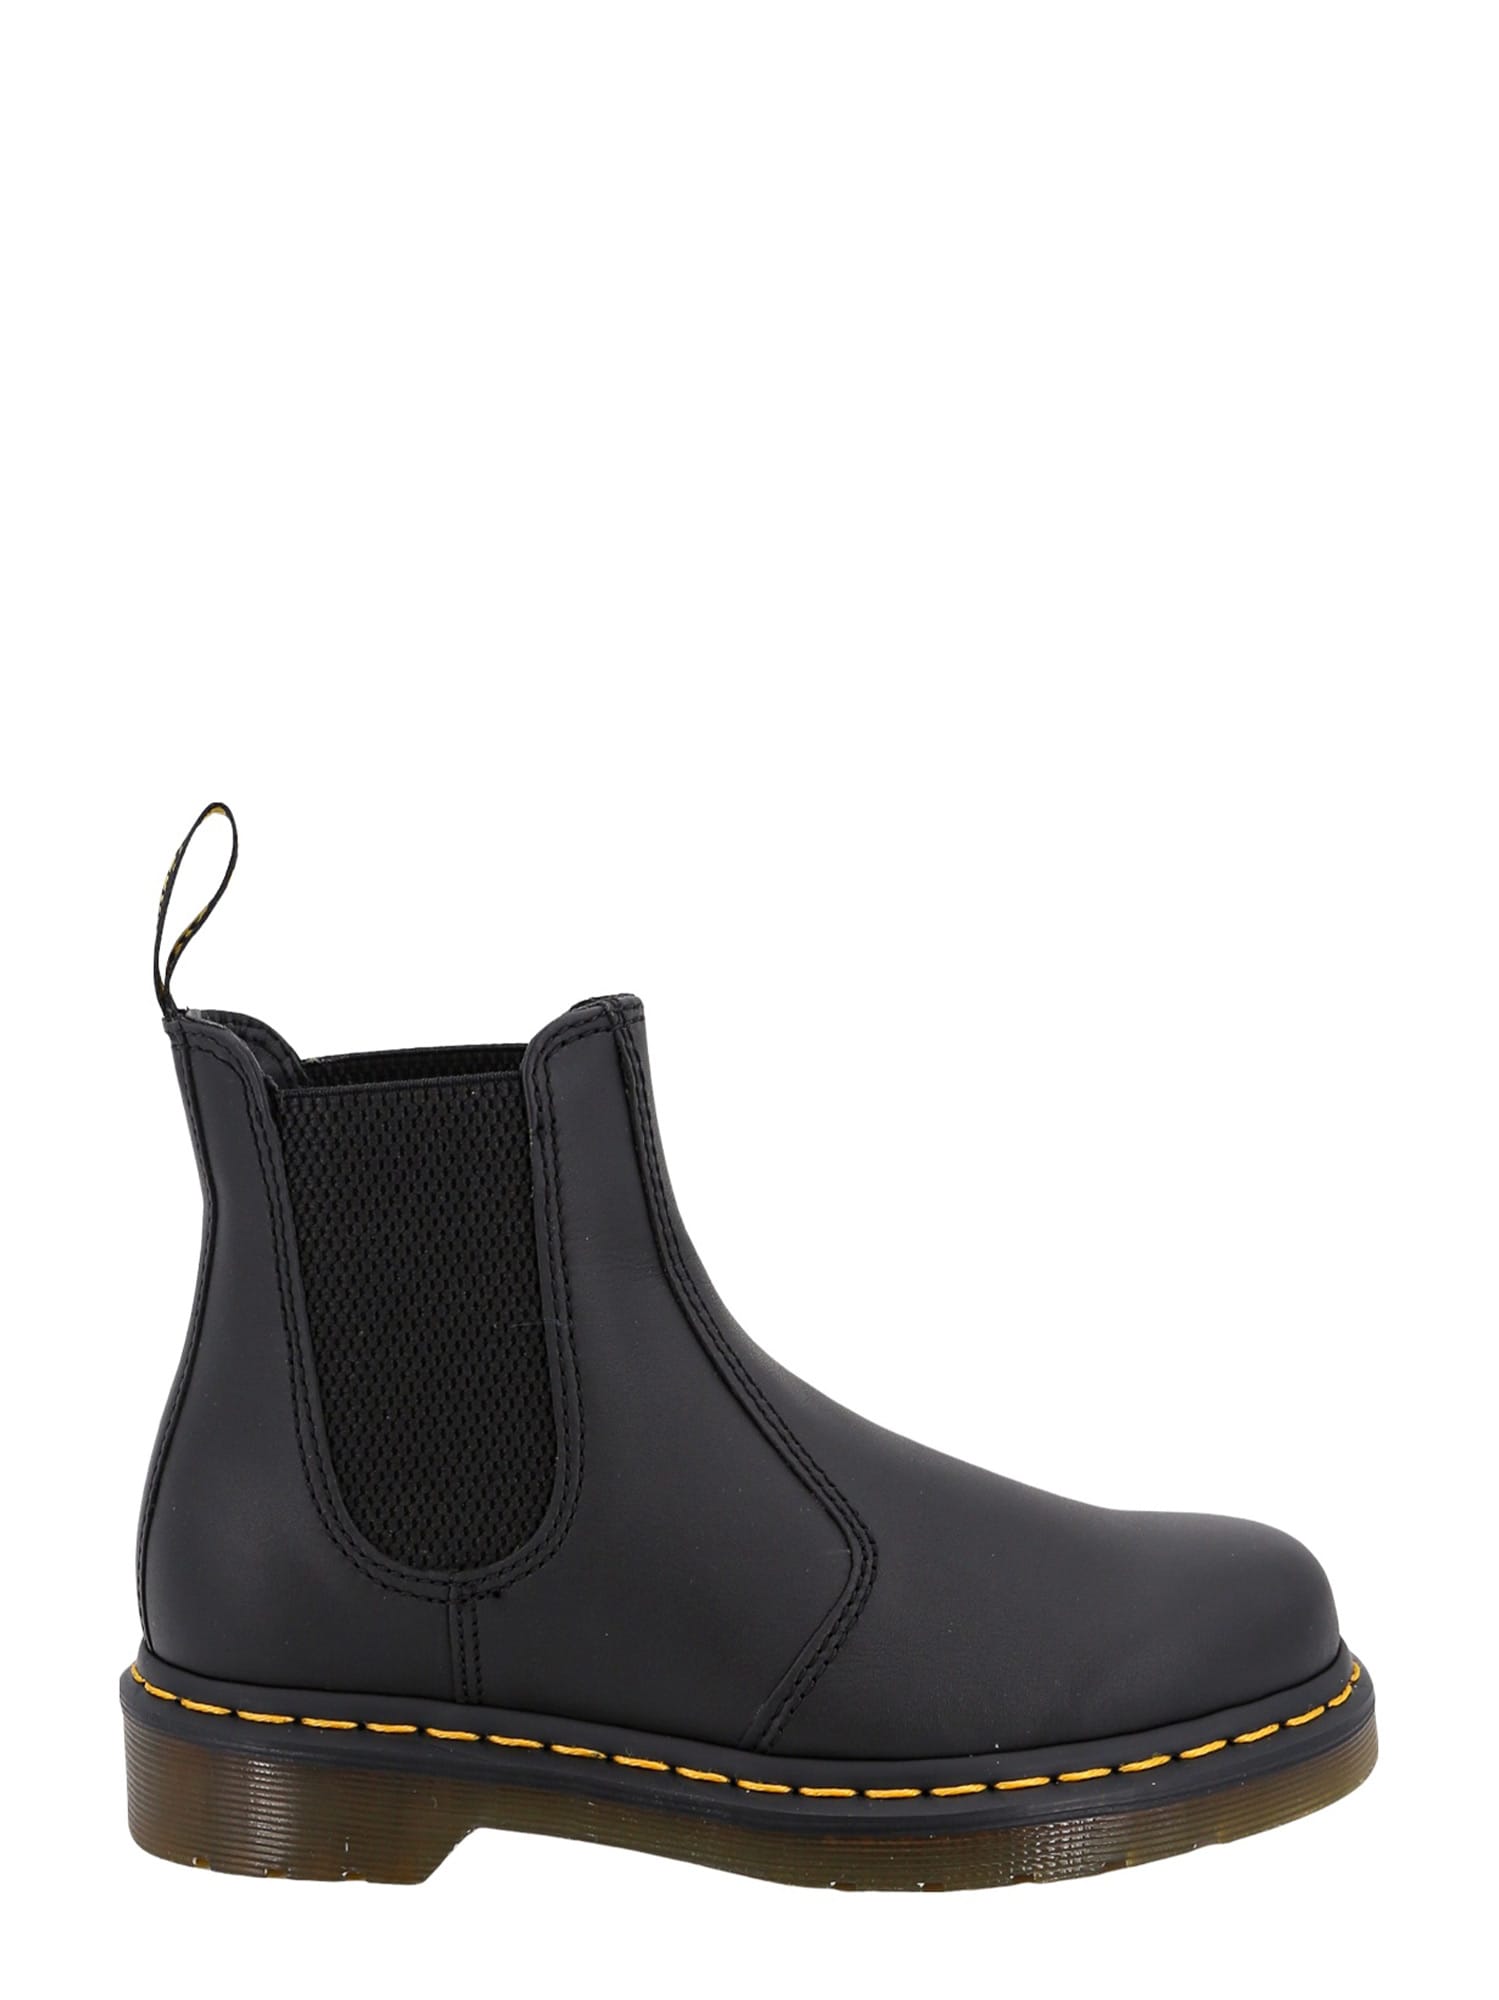 Dr. Martens' Ankle Boots